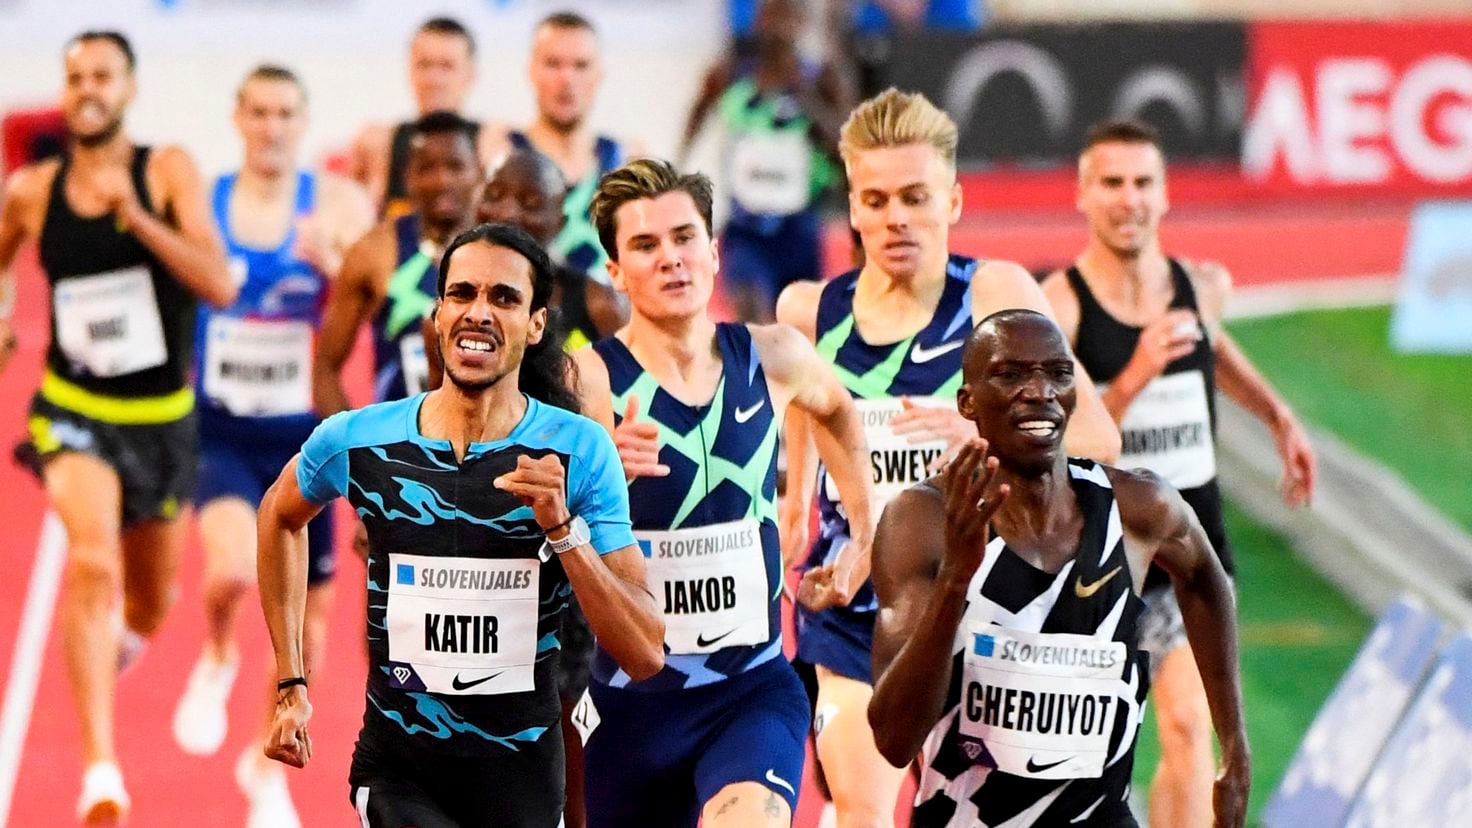 1500m at the 2022 World Athletics Championships when is the final